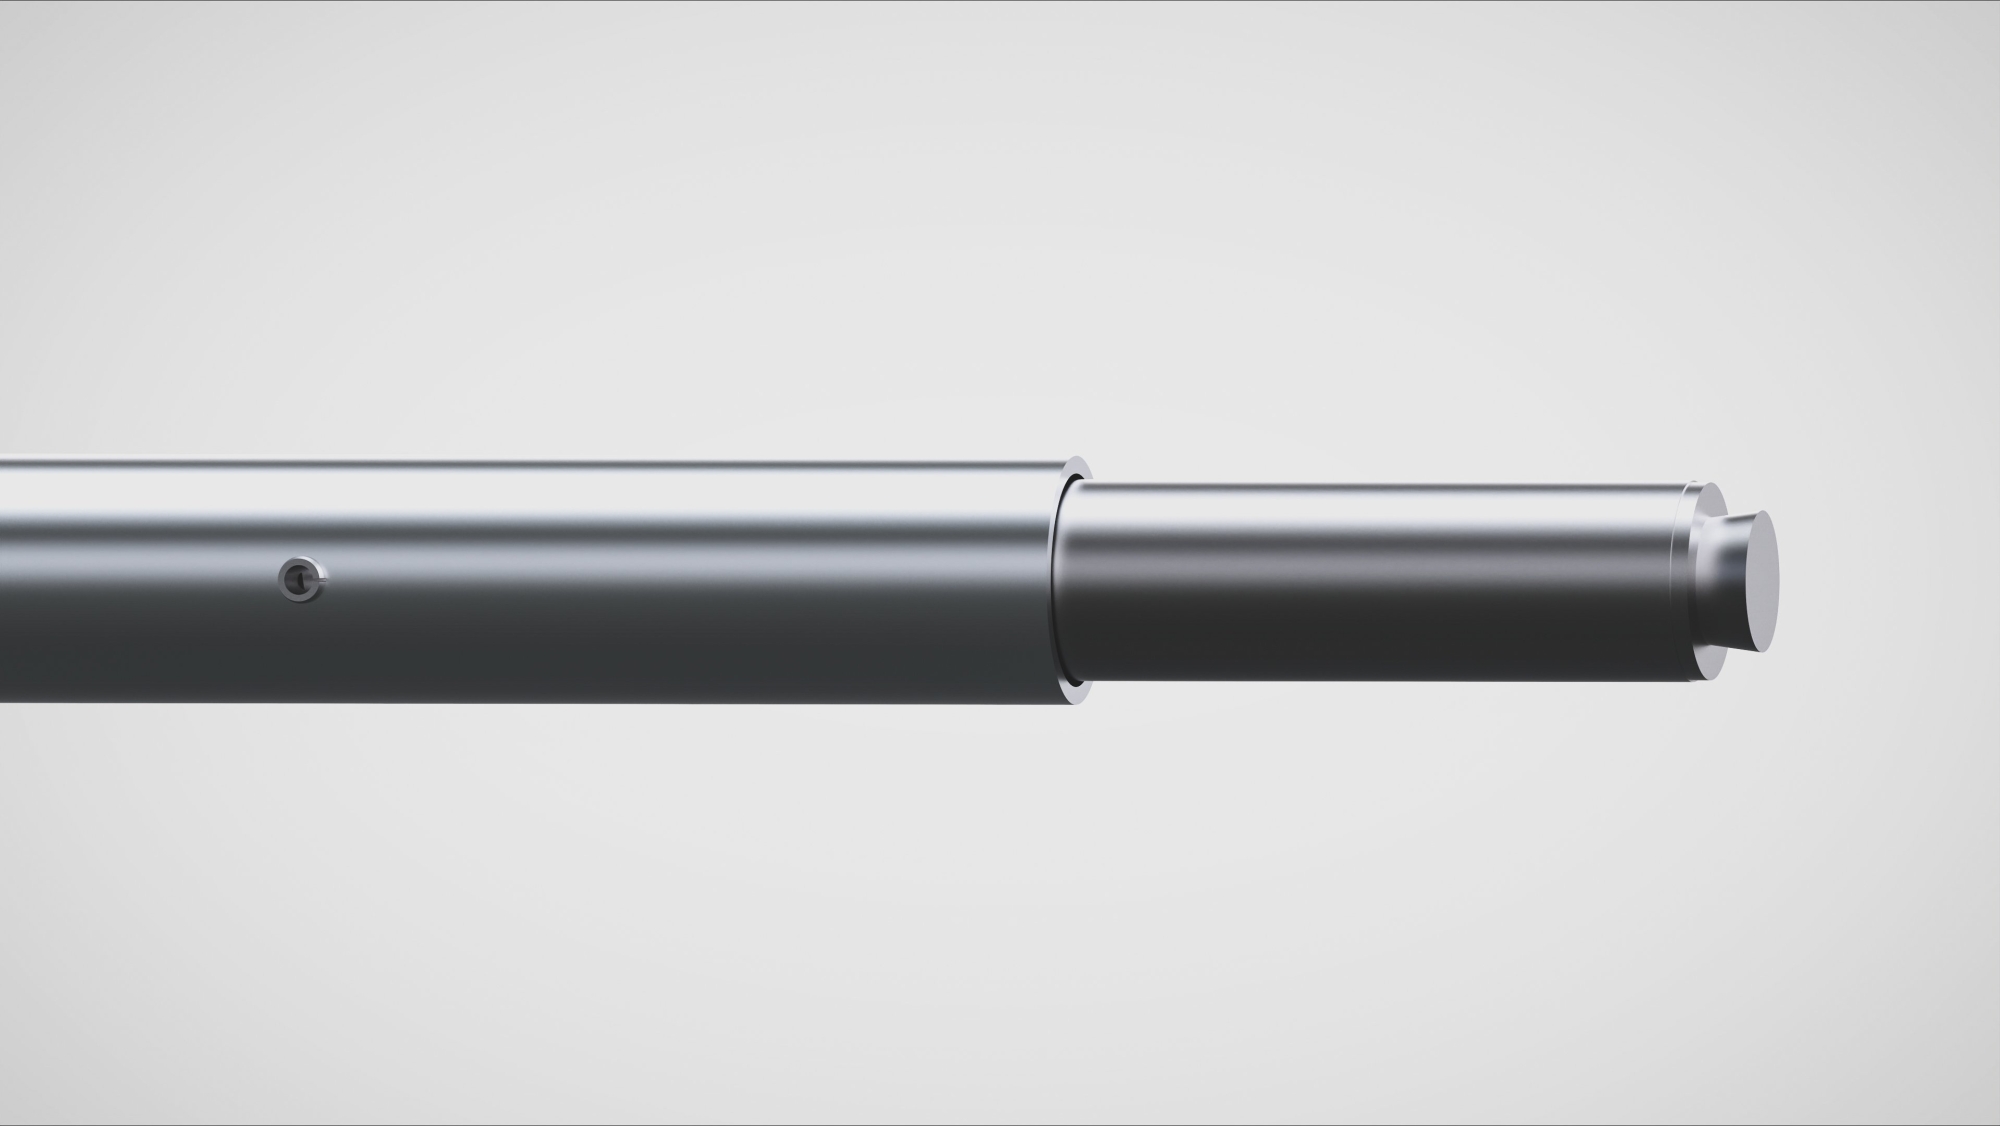 Telescopic Shoring Poles for load securing